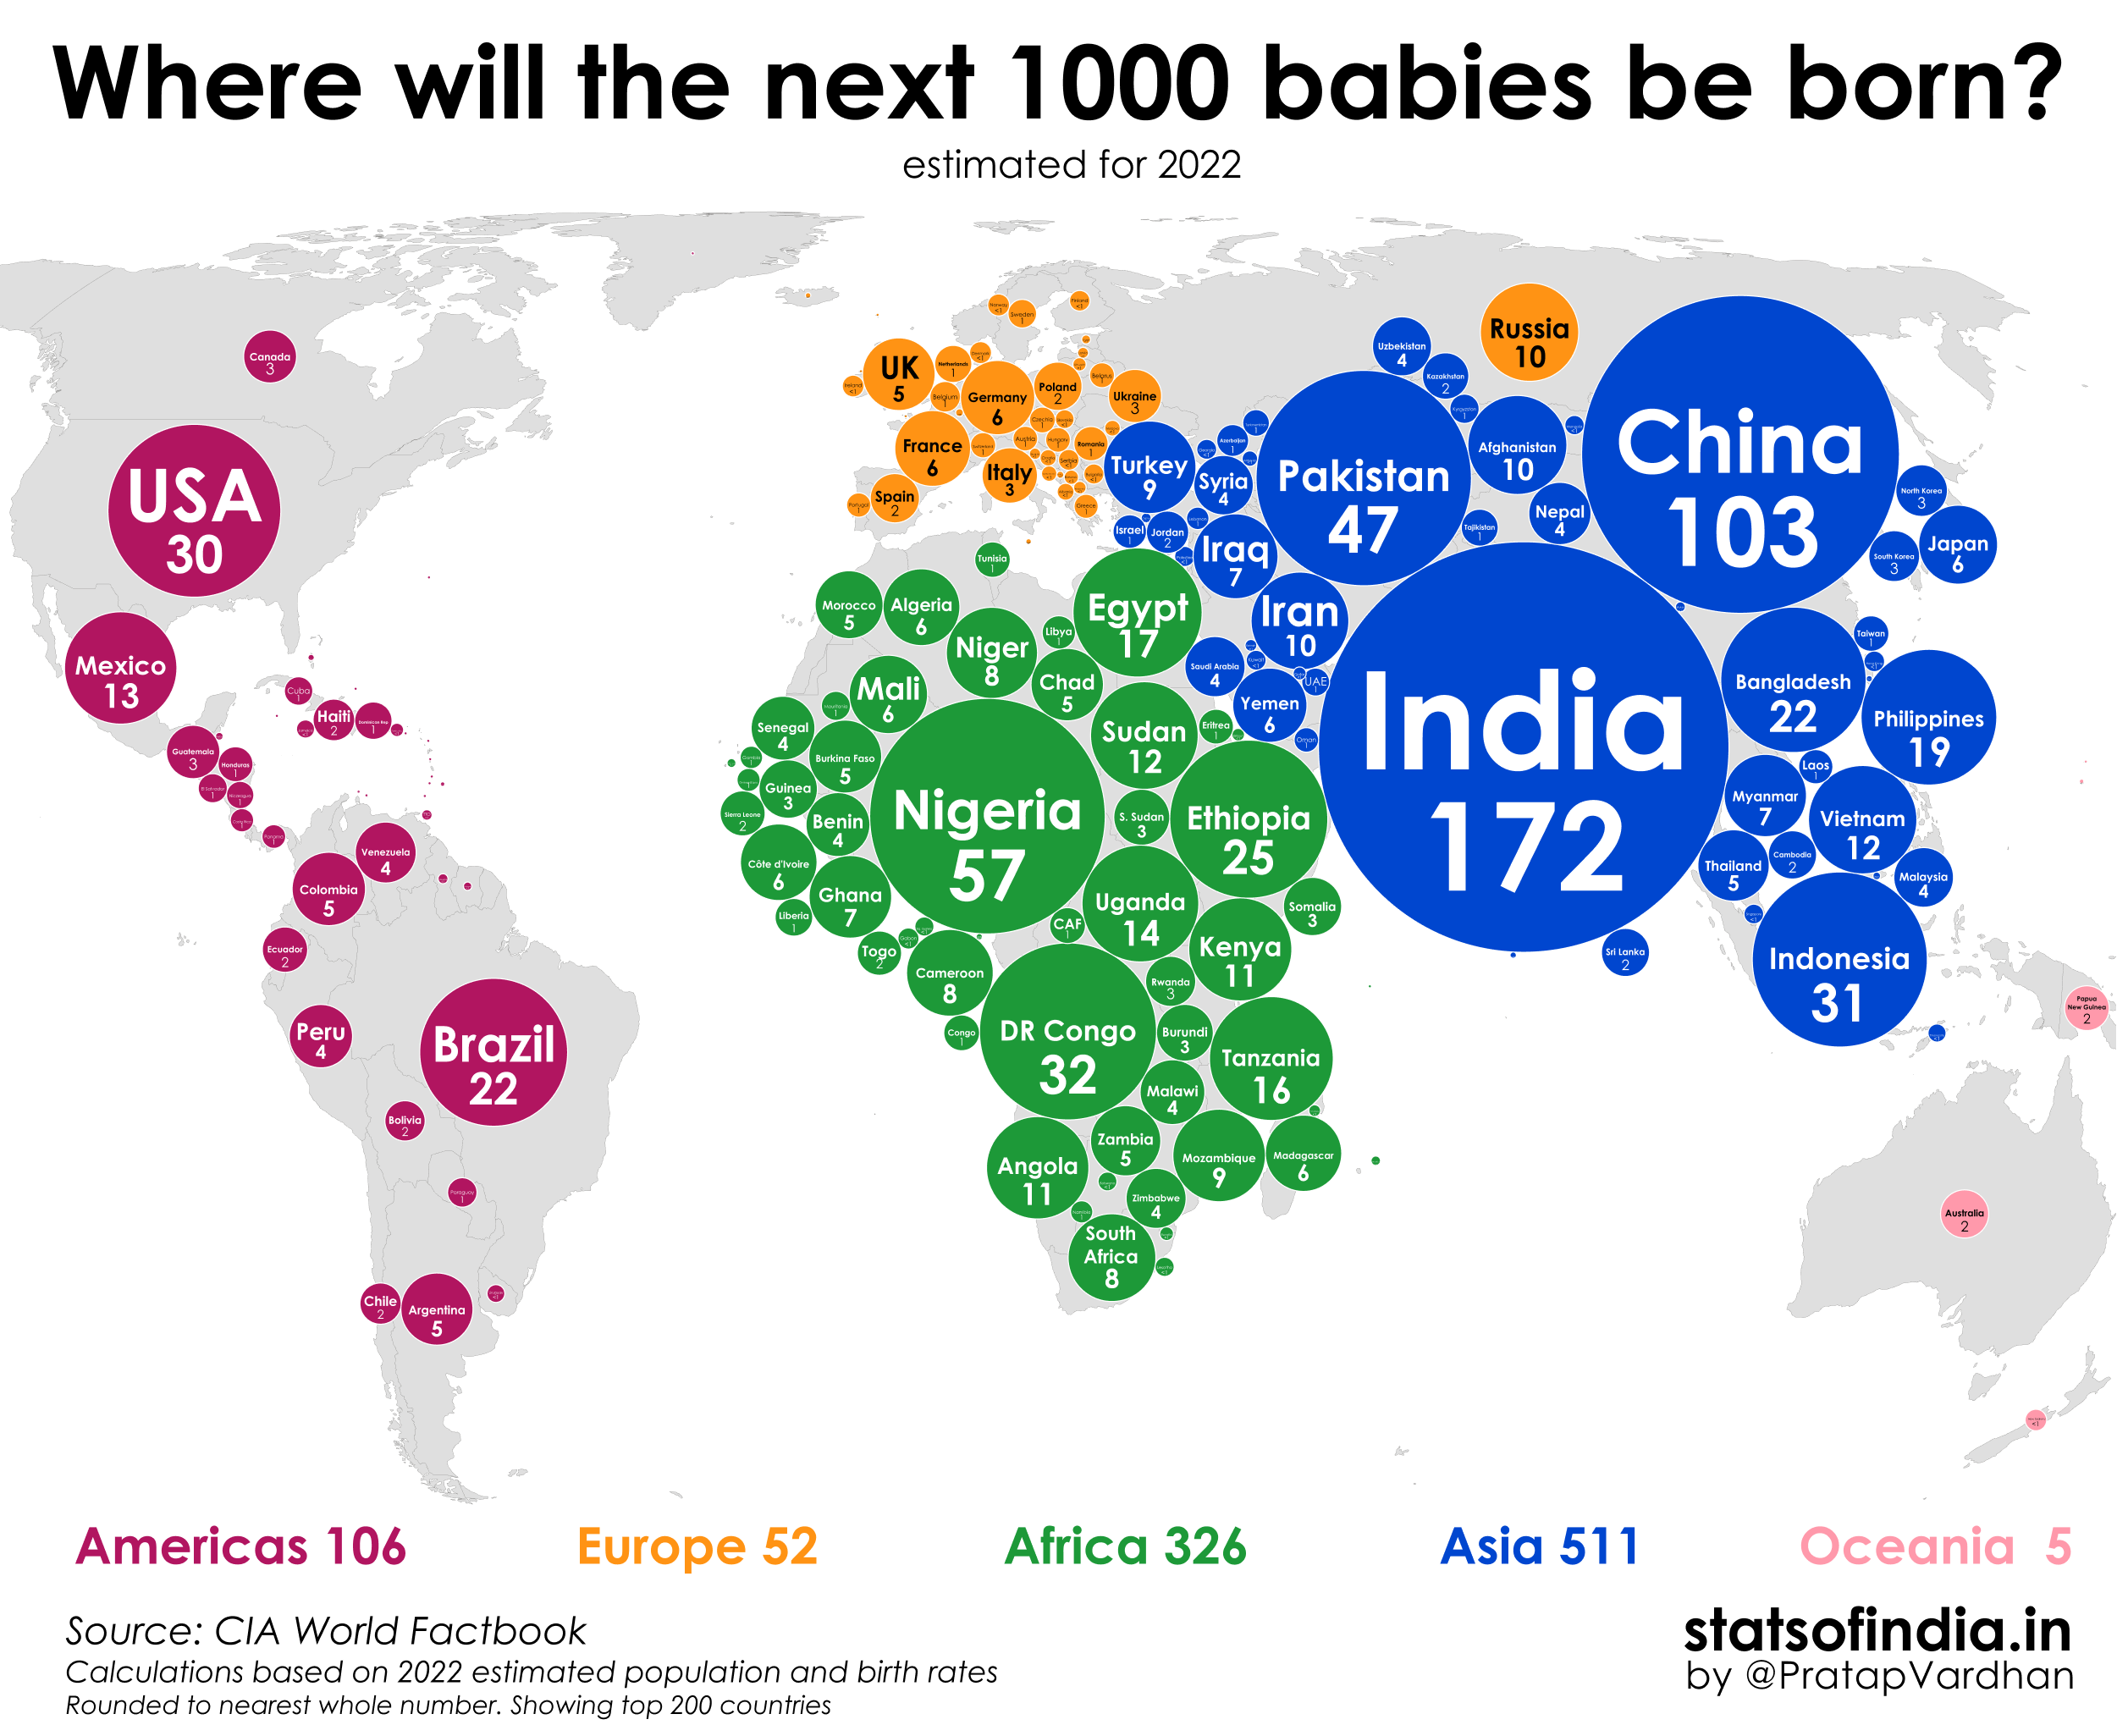 Map showing where the next 1,000 babies will be born, based on birth rates and population estimates